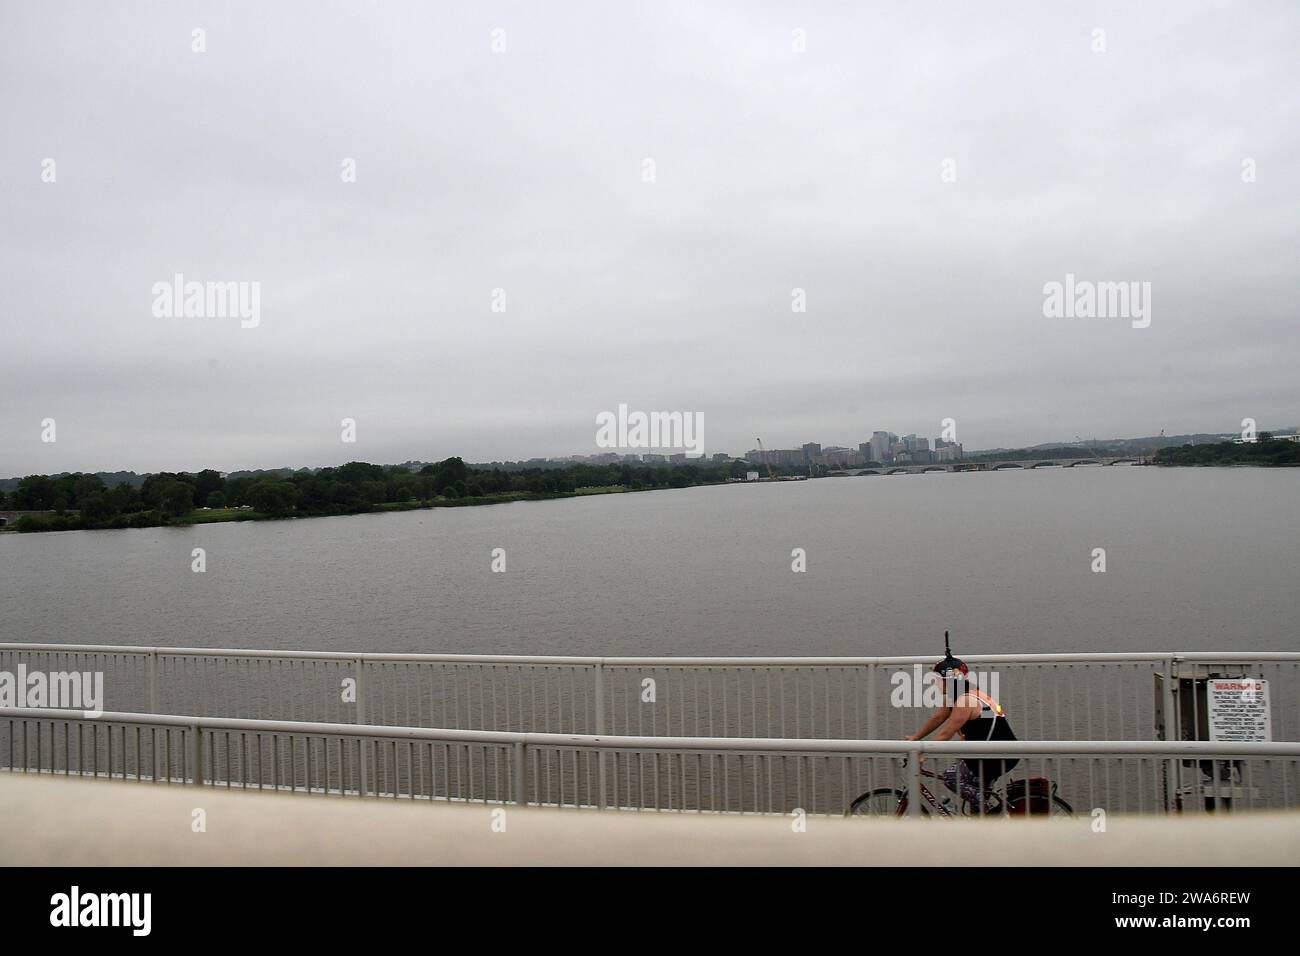 WASHINGTON D C/District of Columbia/USA./ 09 .May. 2019/ Female biker crossing over Potomac river in Washintong DC Photo..Francis Dean / Deanpictures. Stock Photo